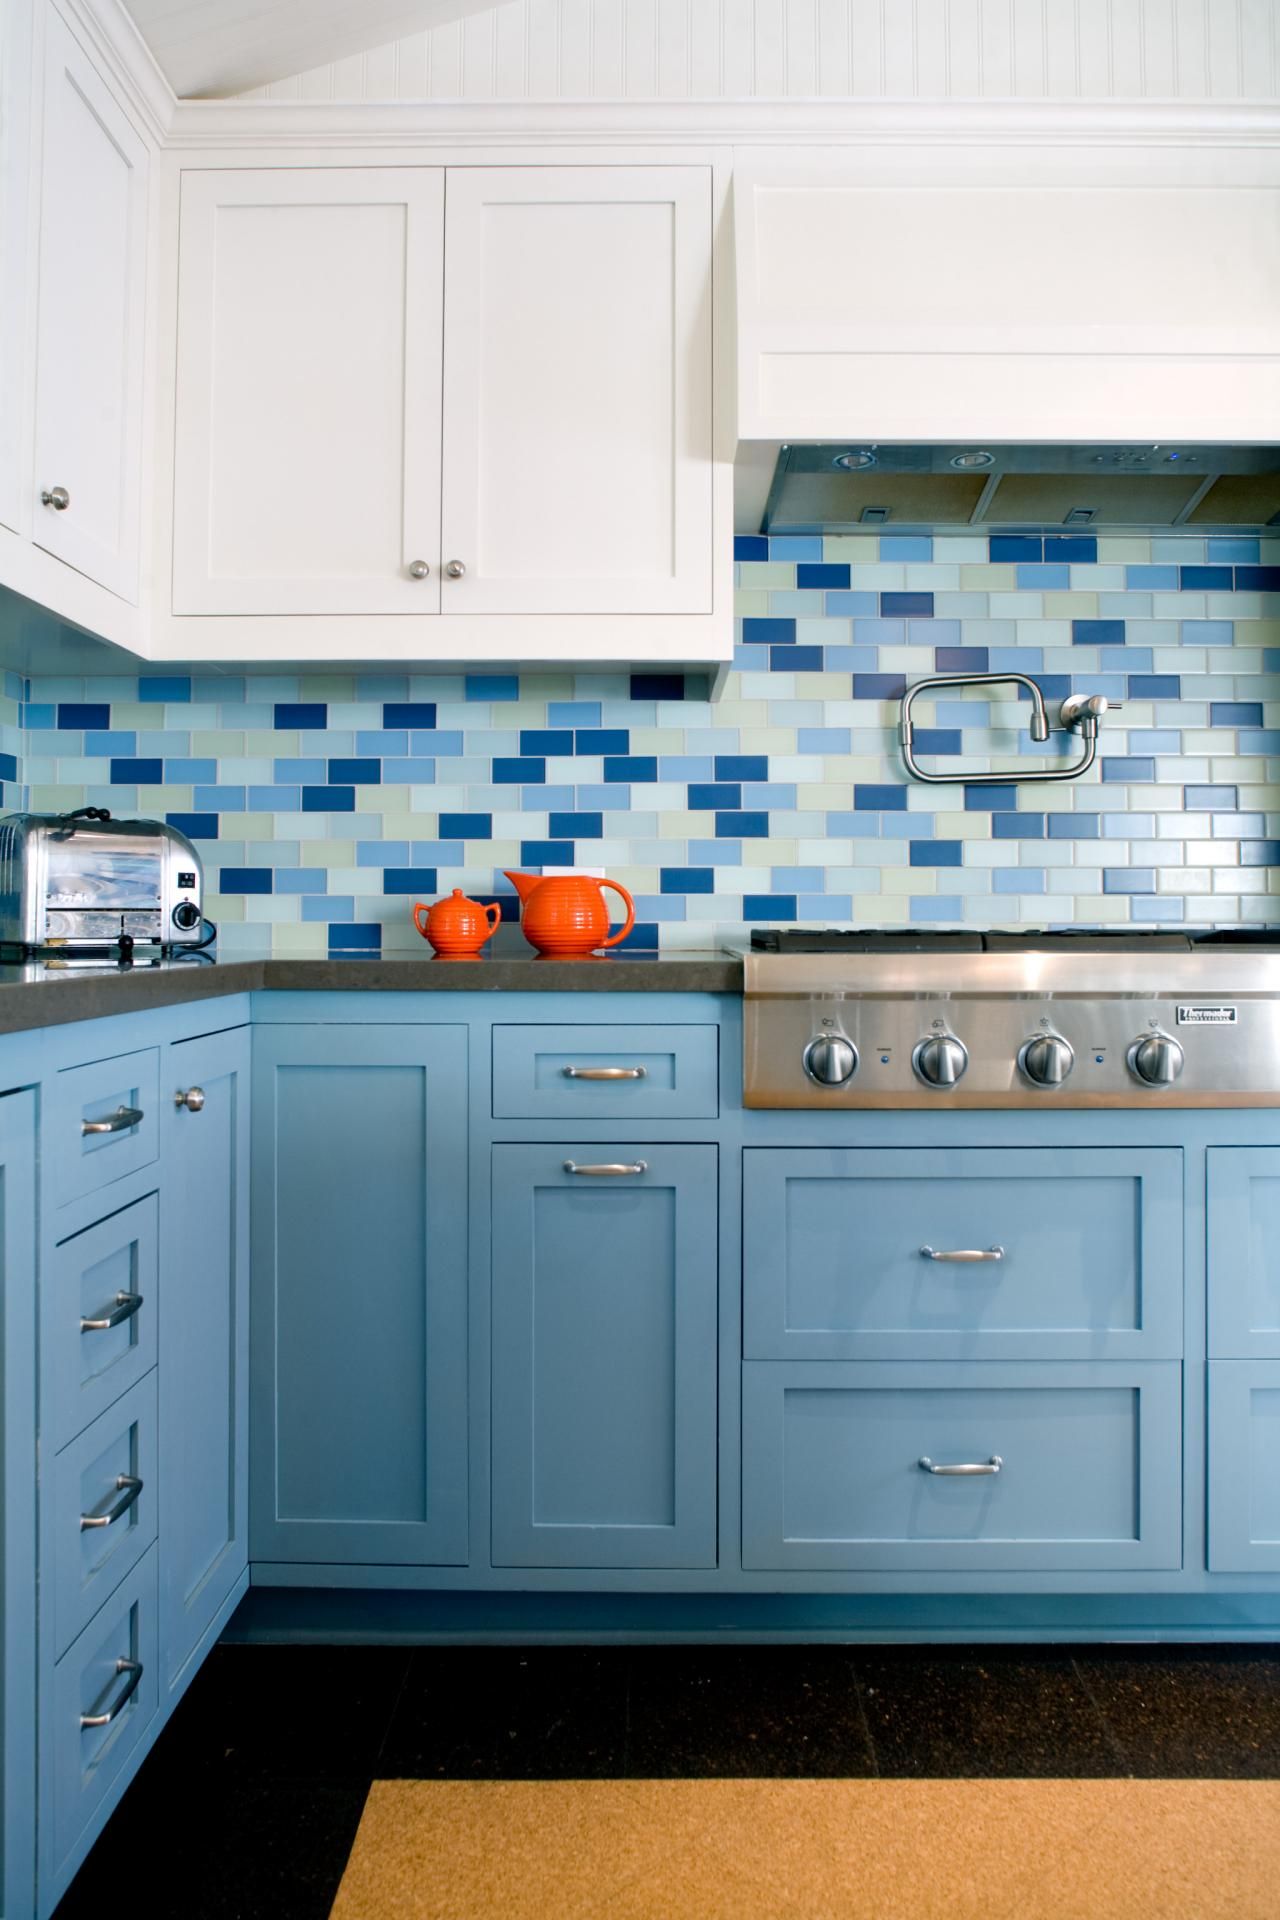 Shades of blue as a cool kitchen splashback